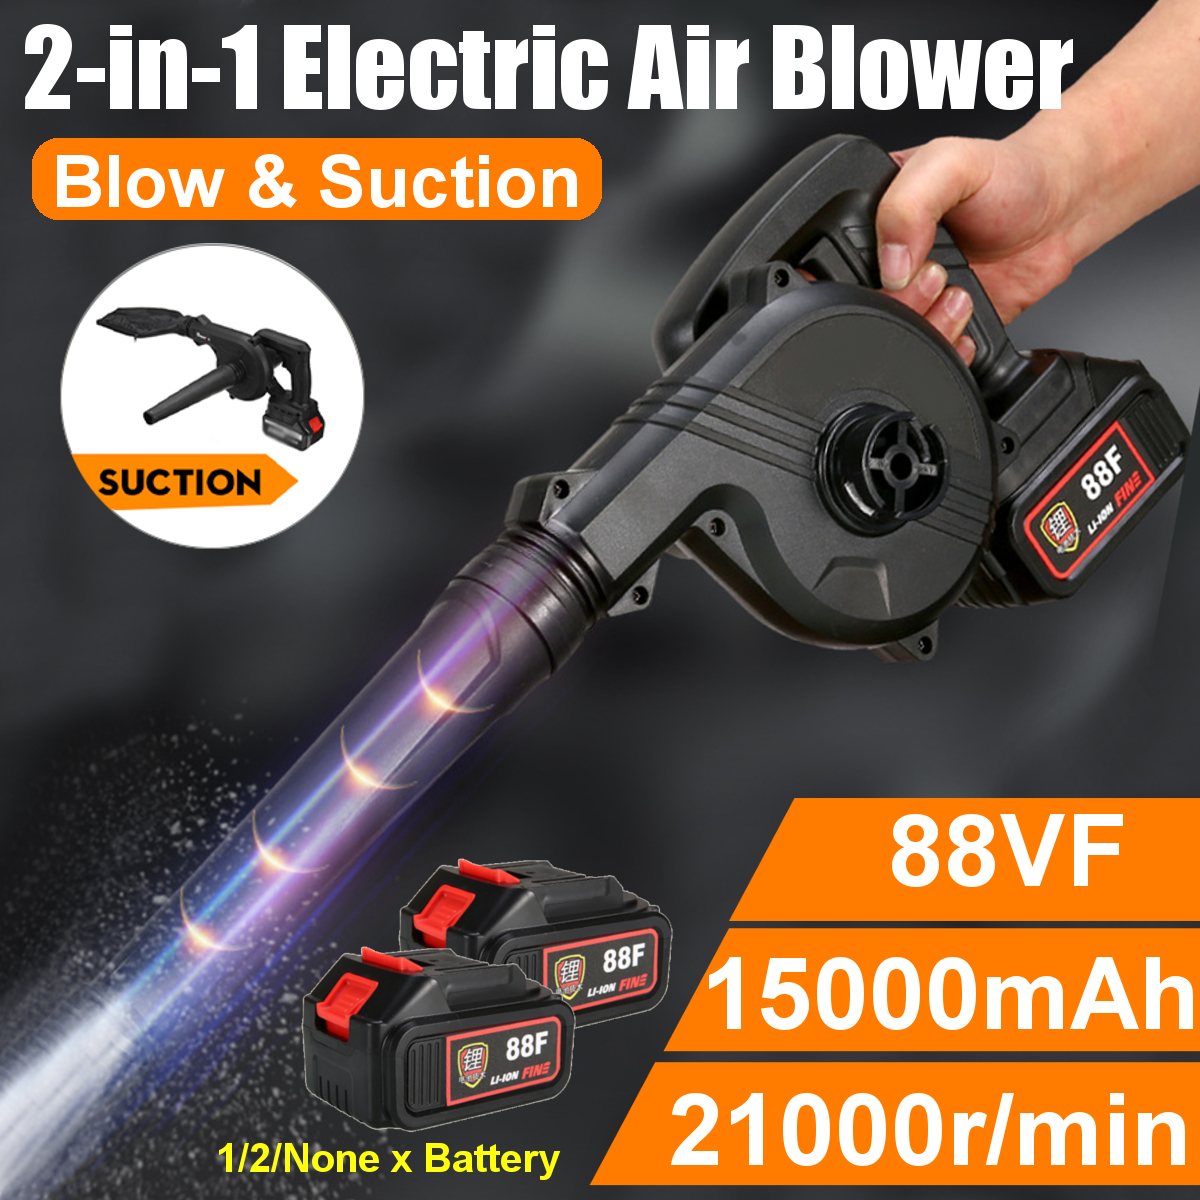 88VF-1500W-2-in-1-Electric-Air-Blower-Wireless-Vehicle-Computer-Vacuum-Dust-Collector-Leaf-Cleaner-W-1861025-5